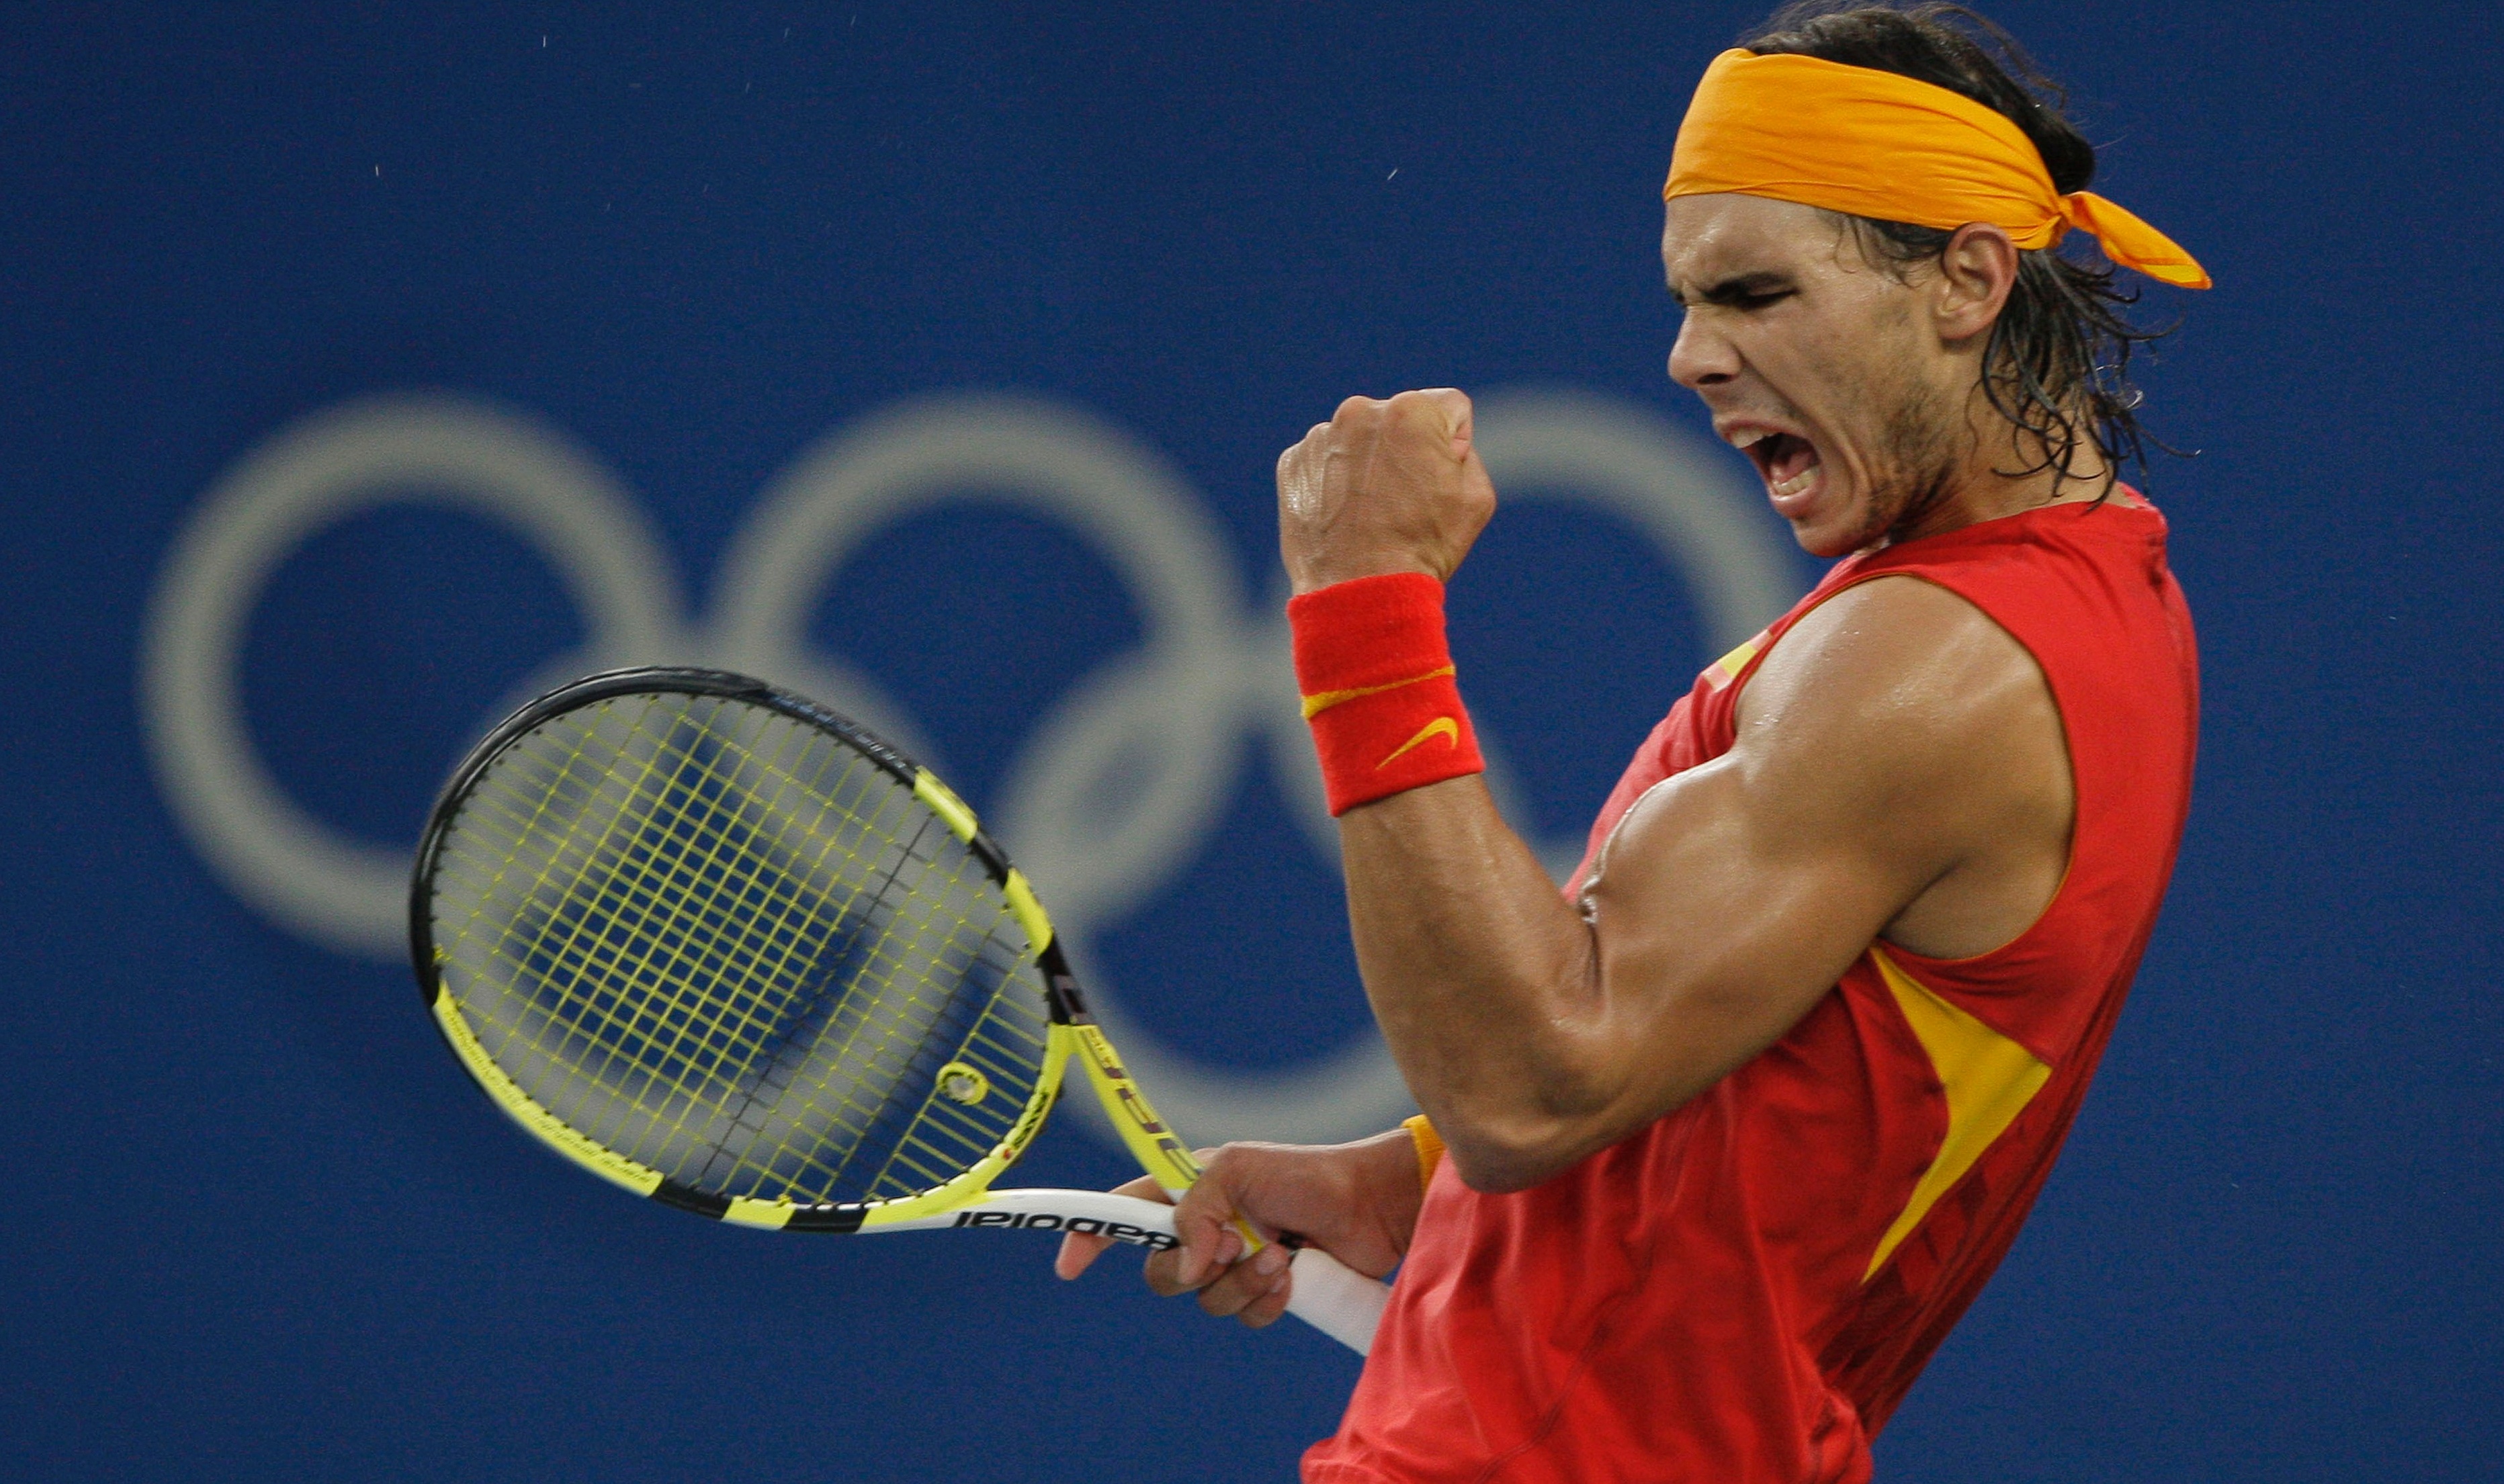 'Almost perfect' Nadal cruises past Isner into Rome quarters